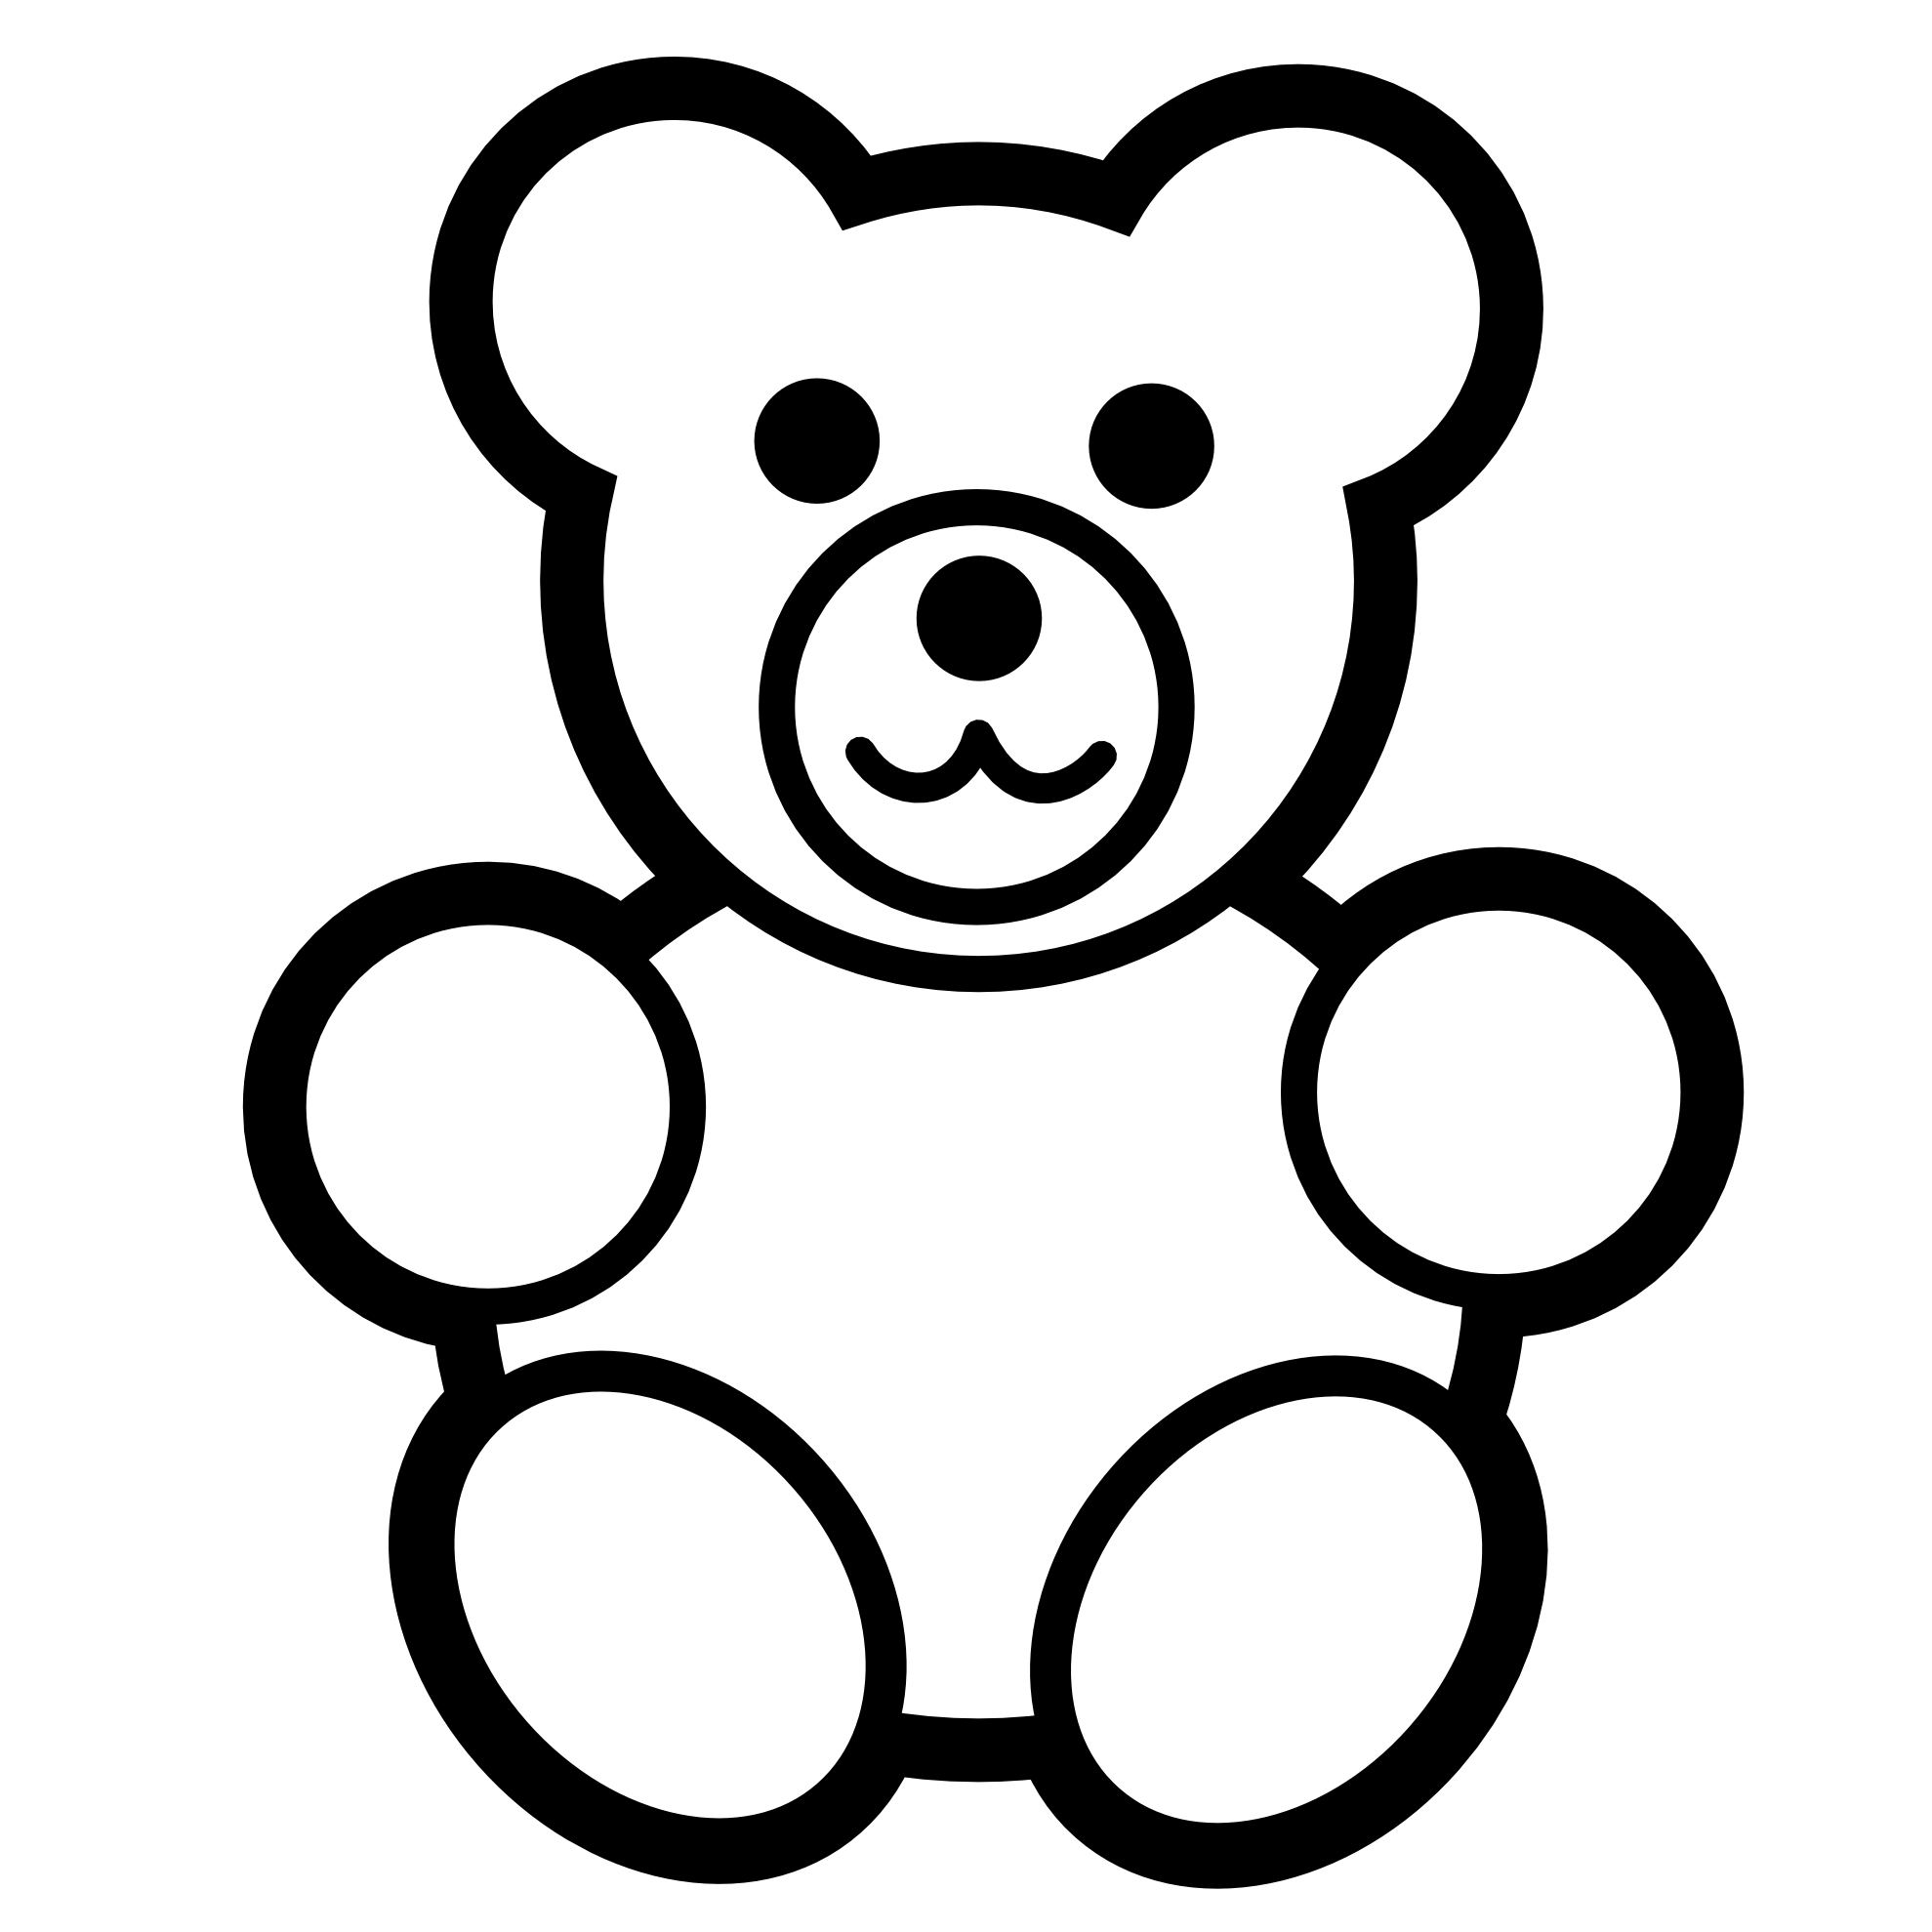 free-outline-of-a-bear-download-free-outline-of-a-bear-png-images-free-cliparts-on-clipart-library